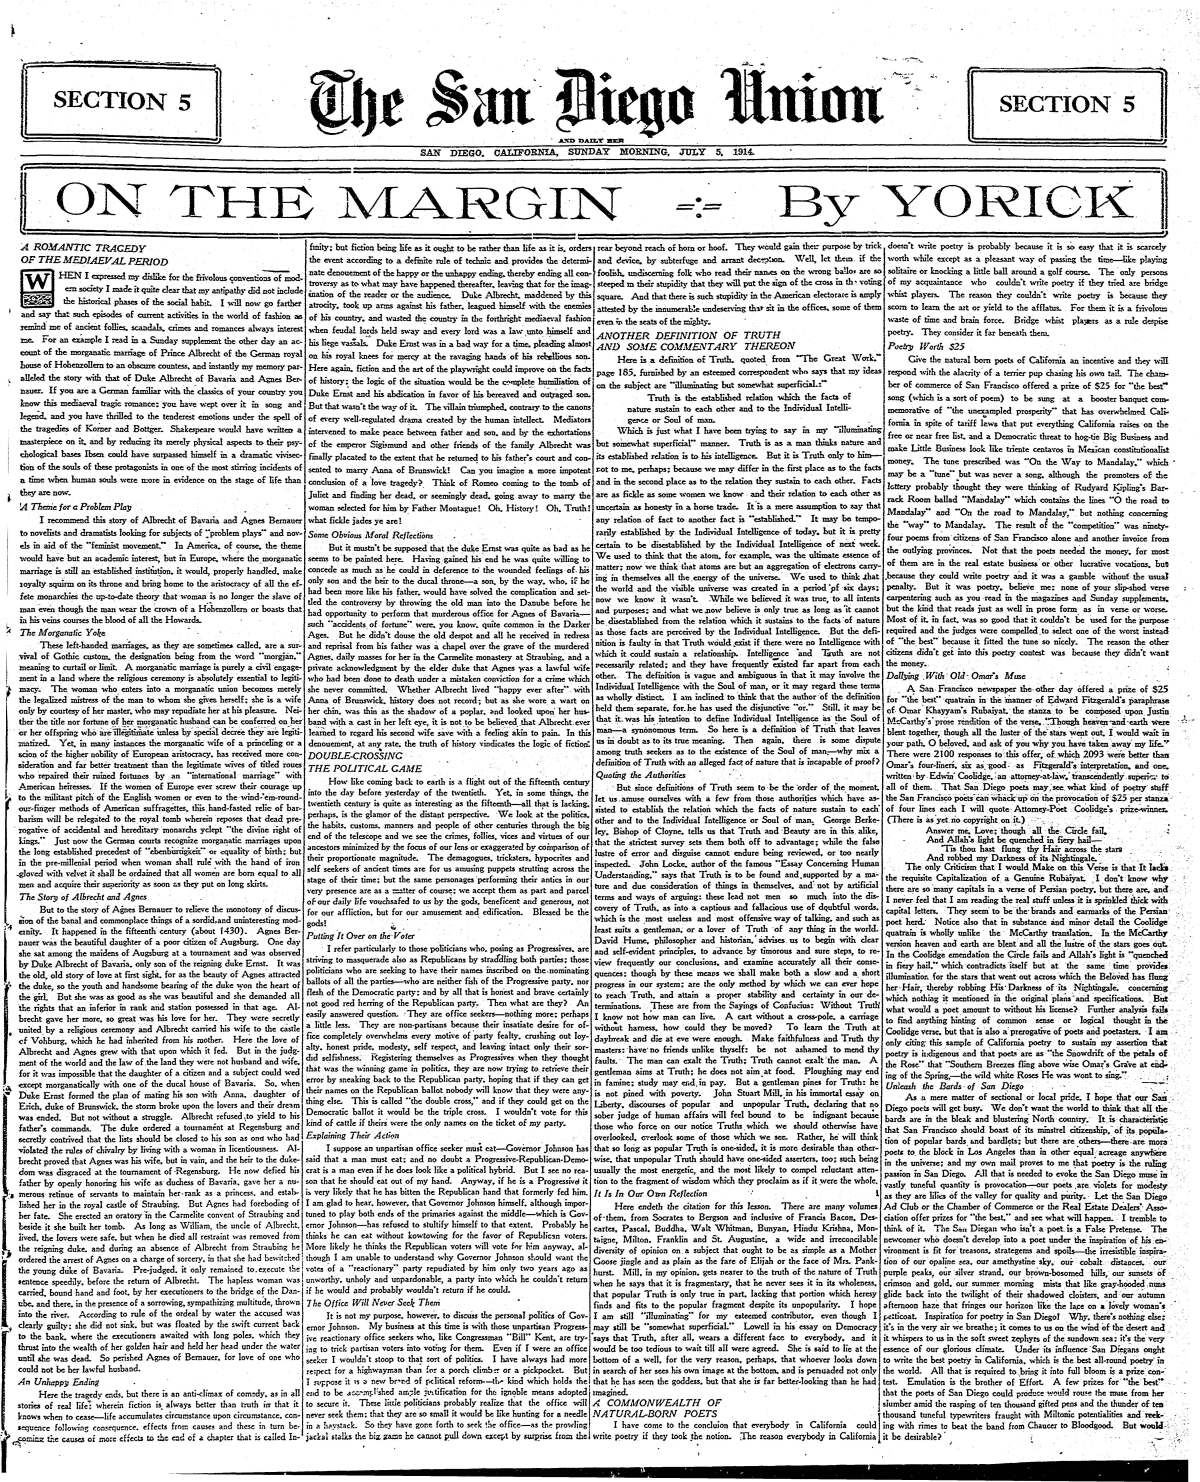 On the Margin by Yorick published in The San Diego Union and Daily Bee on July 5, 1914.